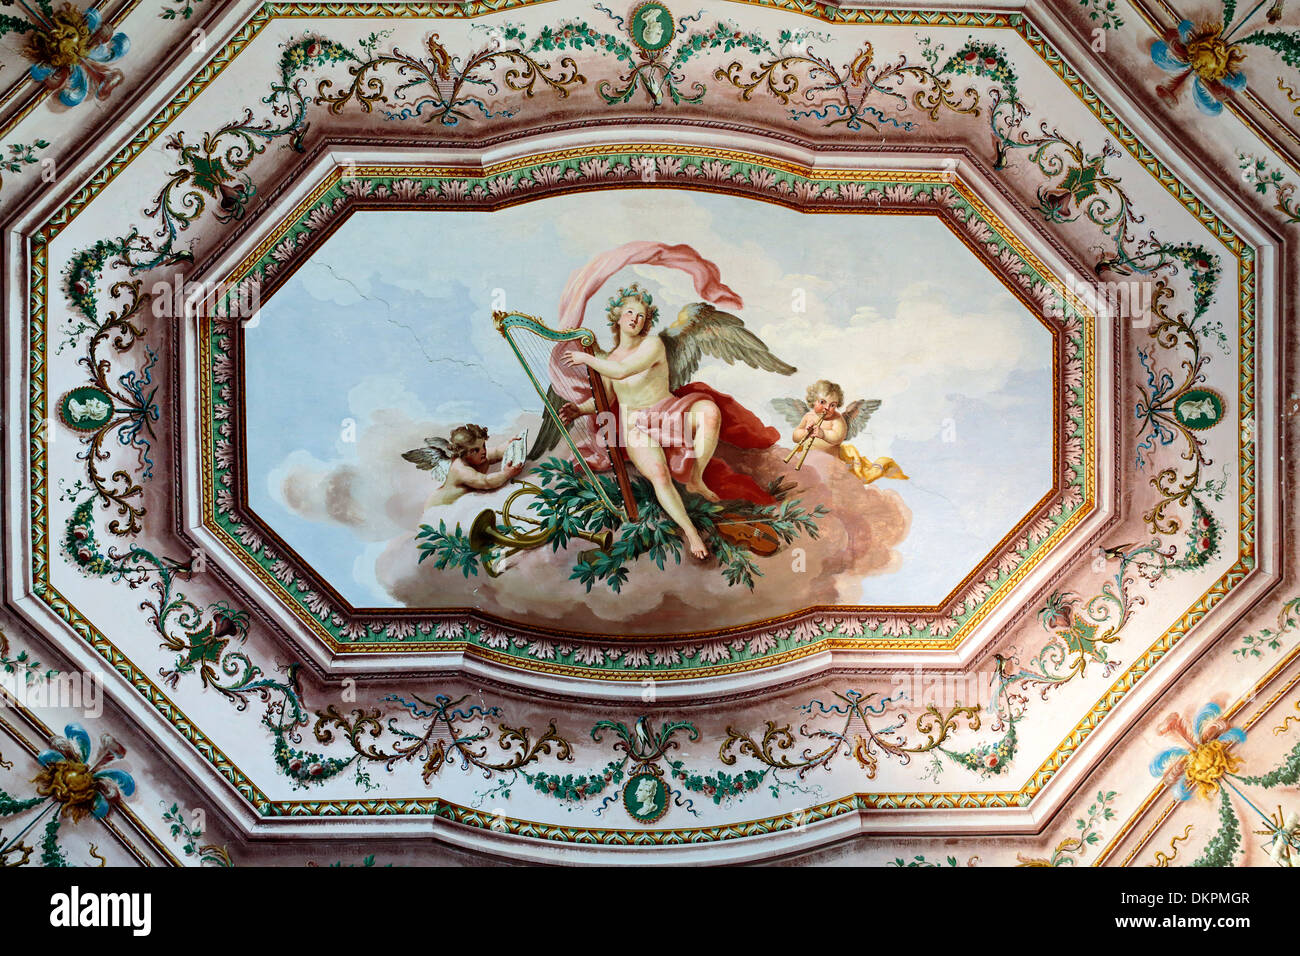 Ceiling painting, room of Allegories, Royal Palace of Caserta, Campania, Italy Stock Photo